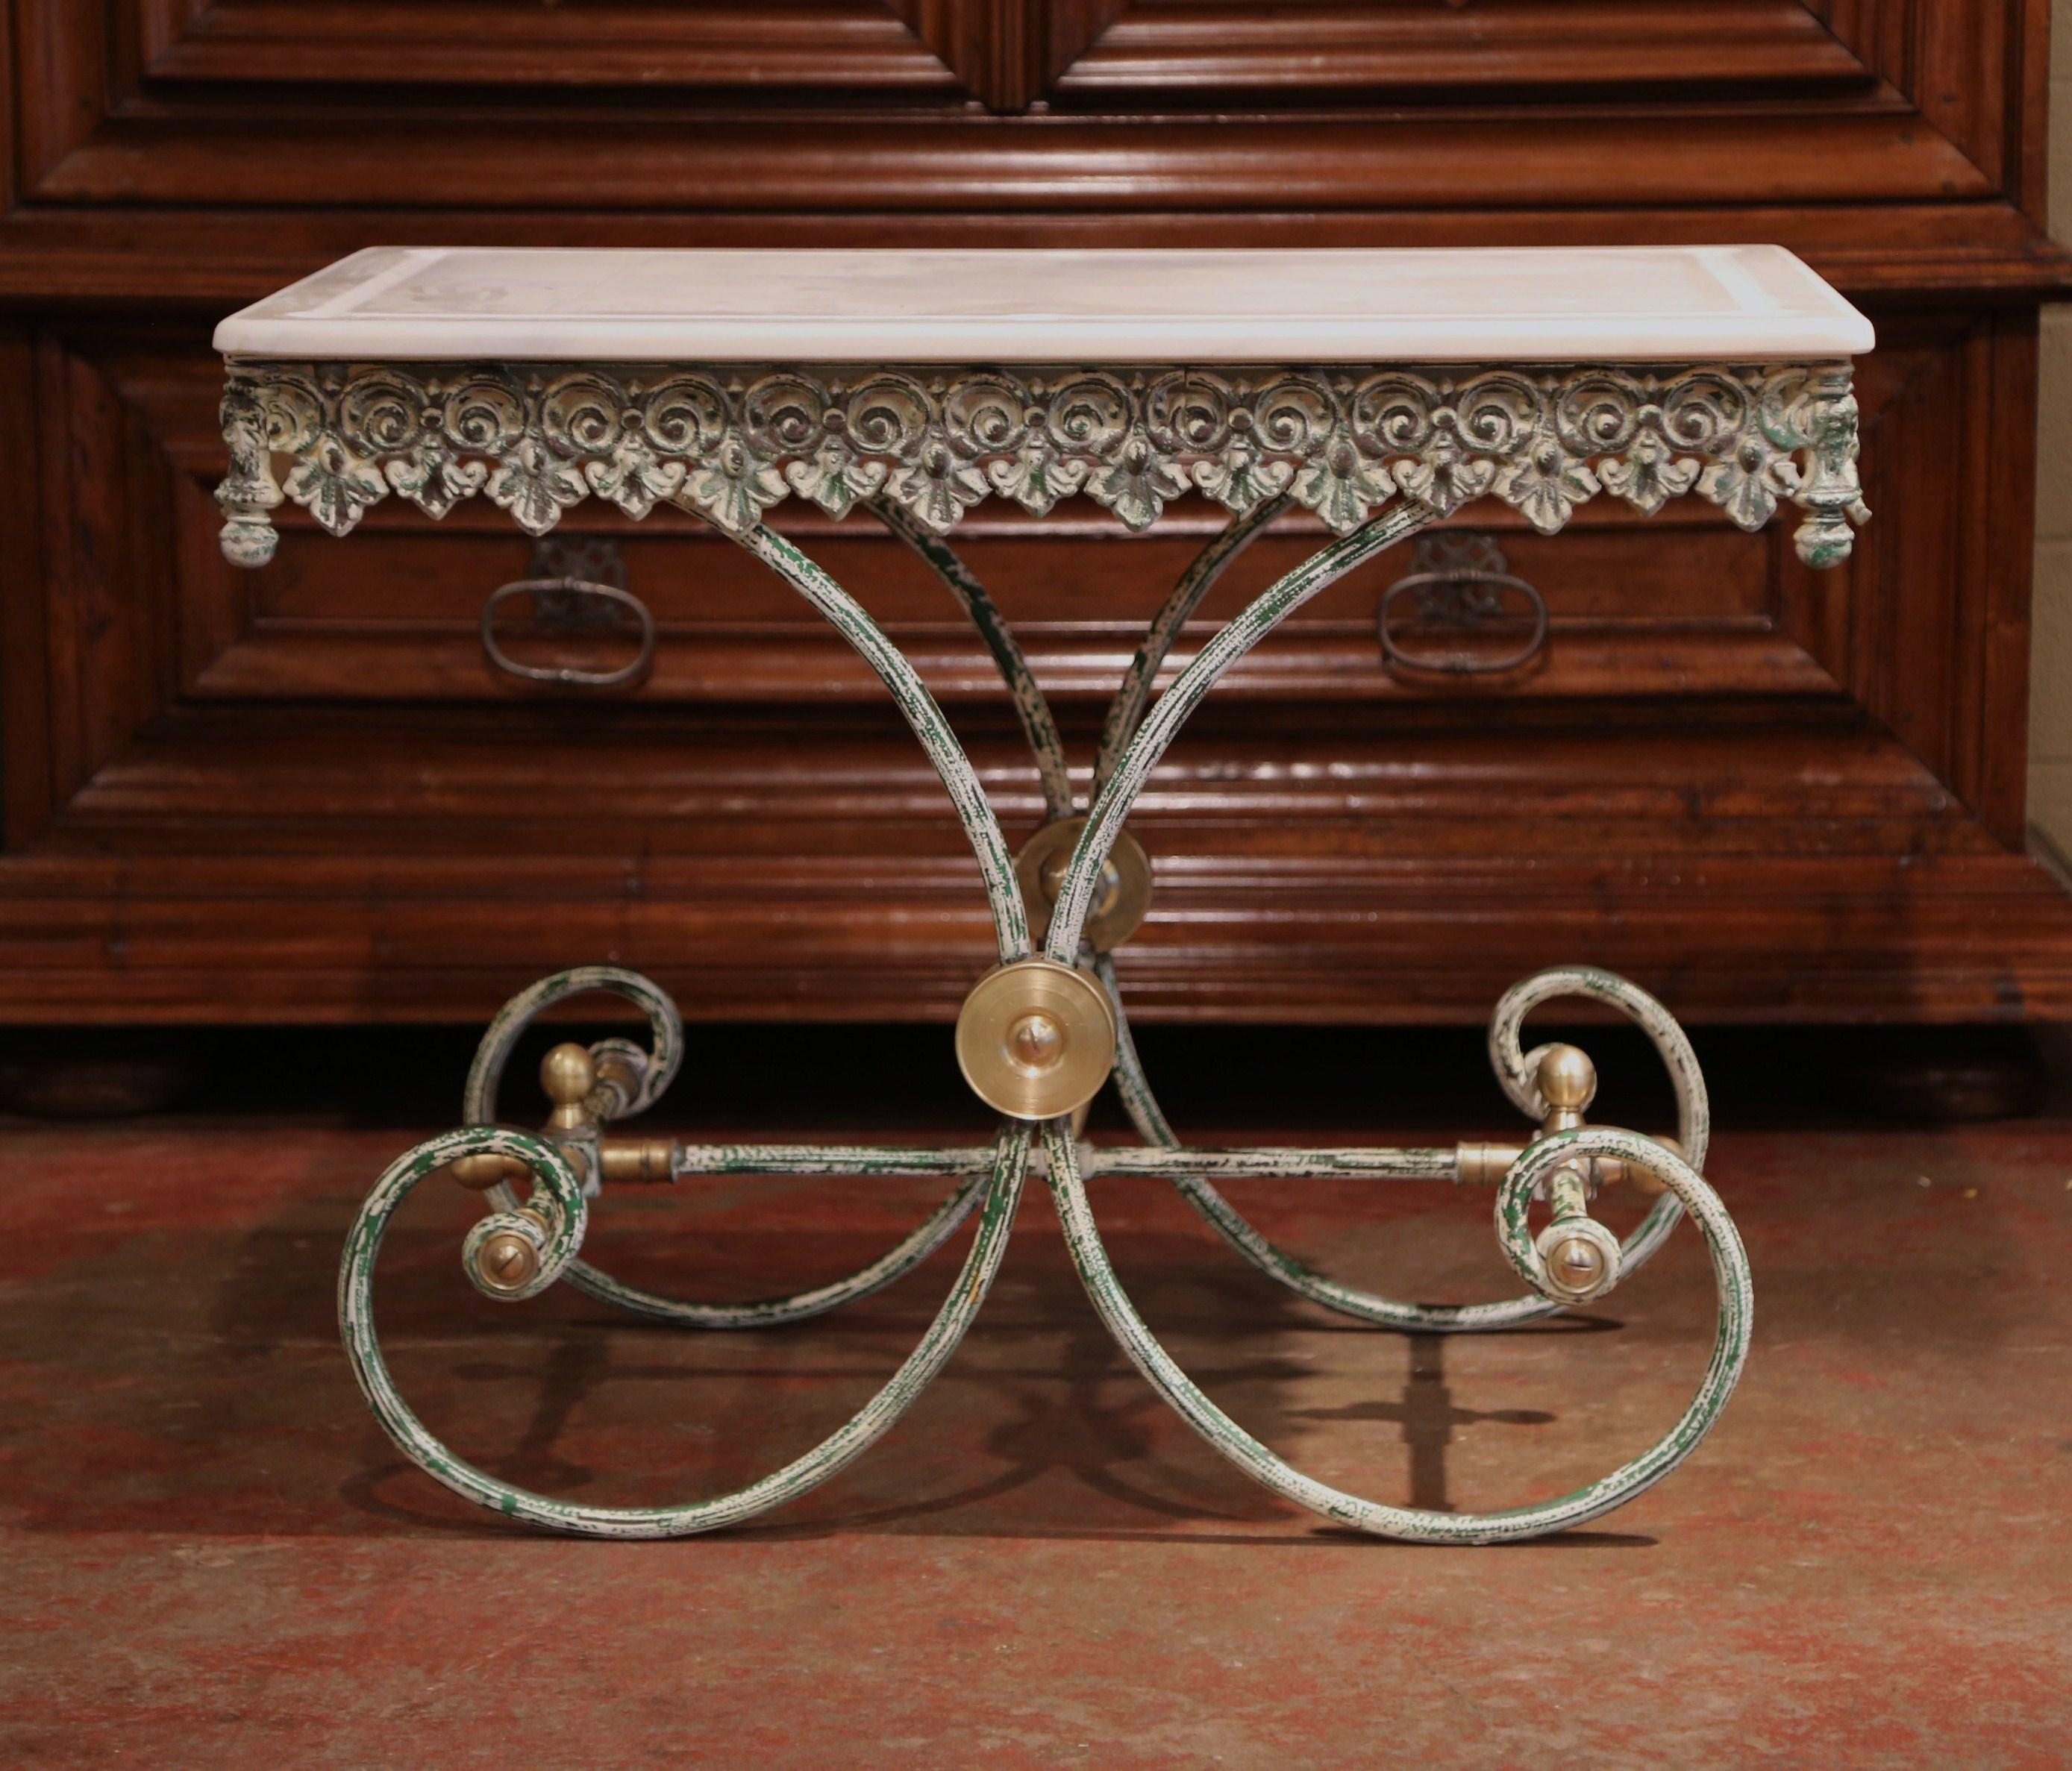 This French butcher table, or pastry table would add the ideal amount of surface space to any kitchen. Crafted in France, the iron work table has an antique green painted finished and features a scalloped apron with intricate metal work, beautiful